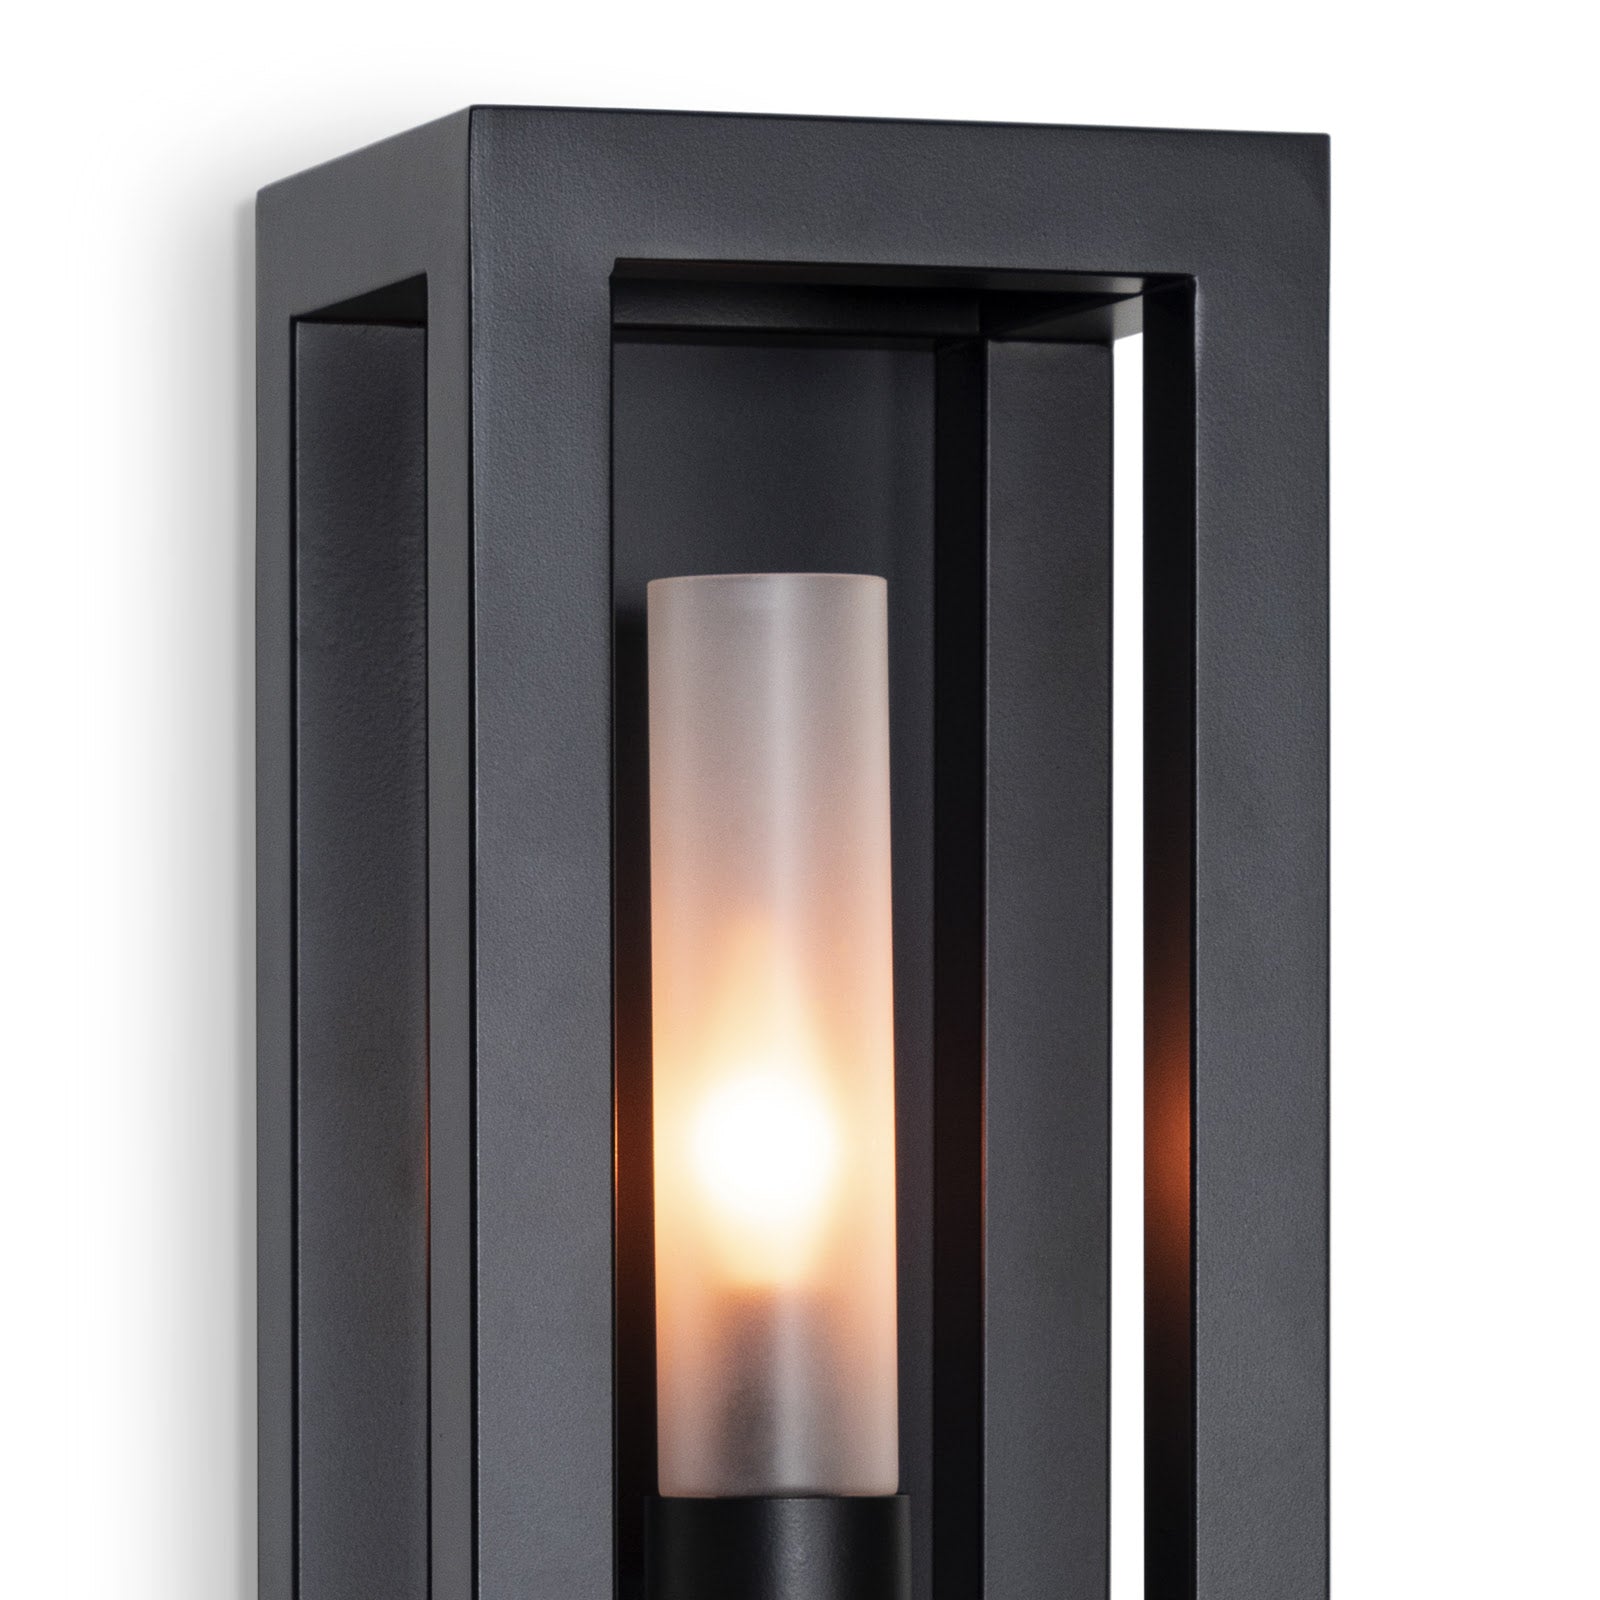 Montecito Up-Down Outdoor Sconce by Coastal Living